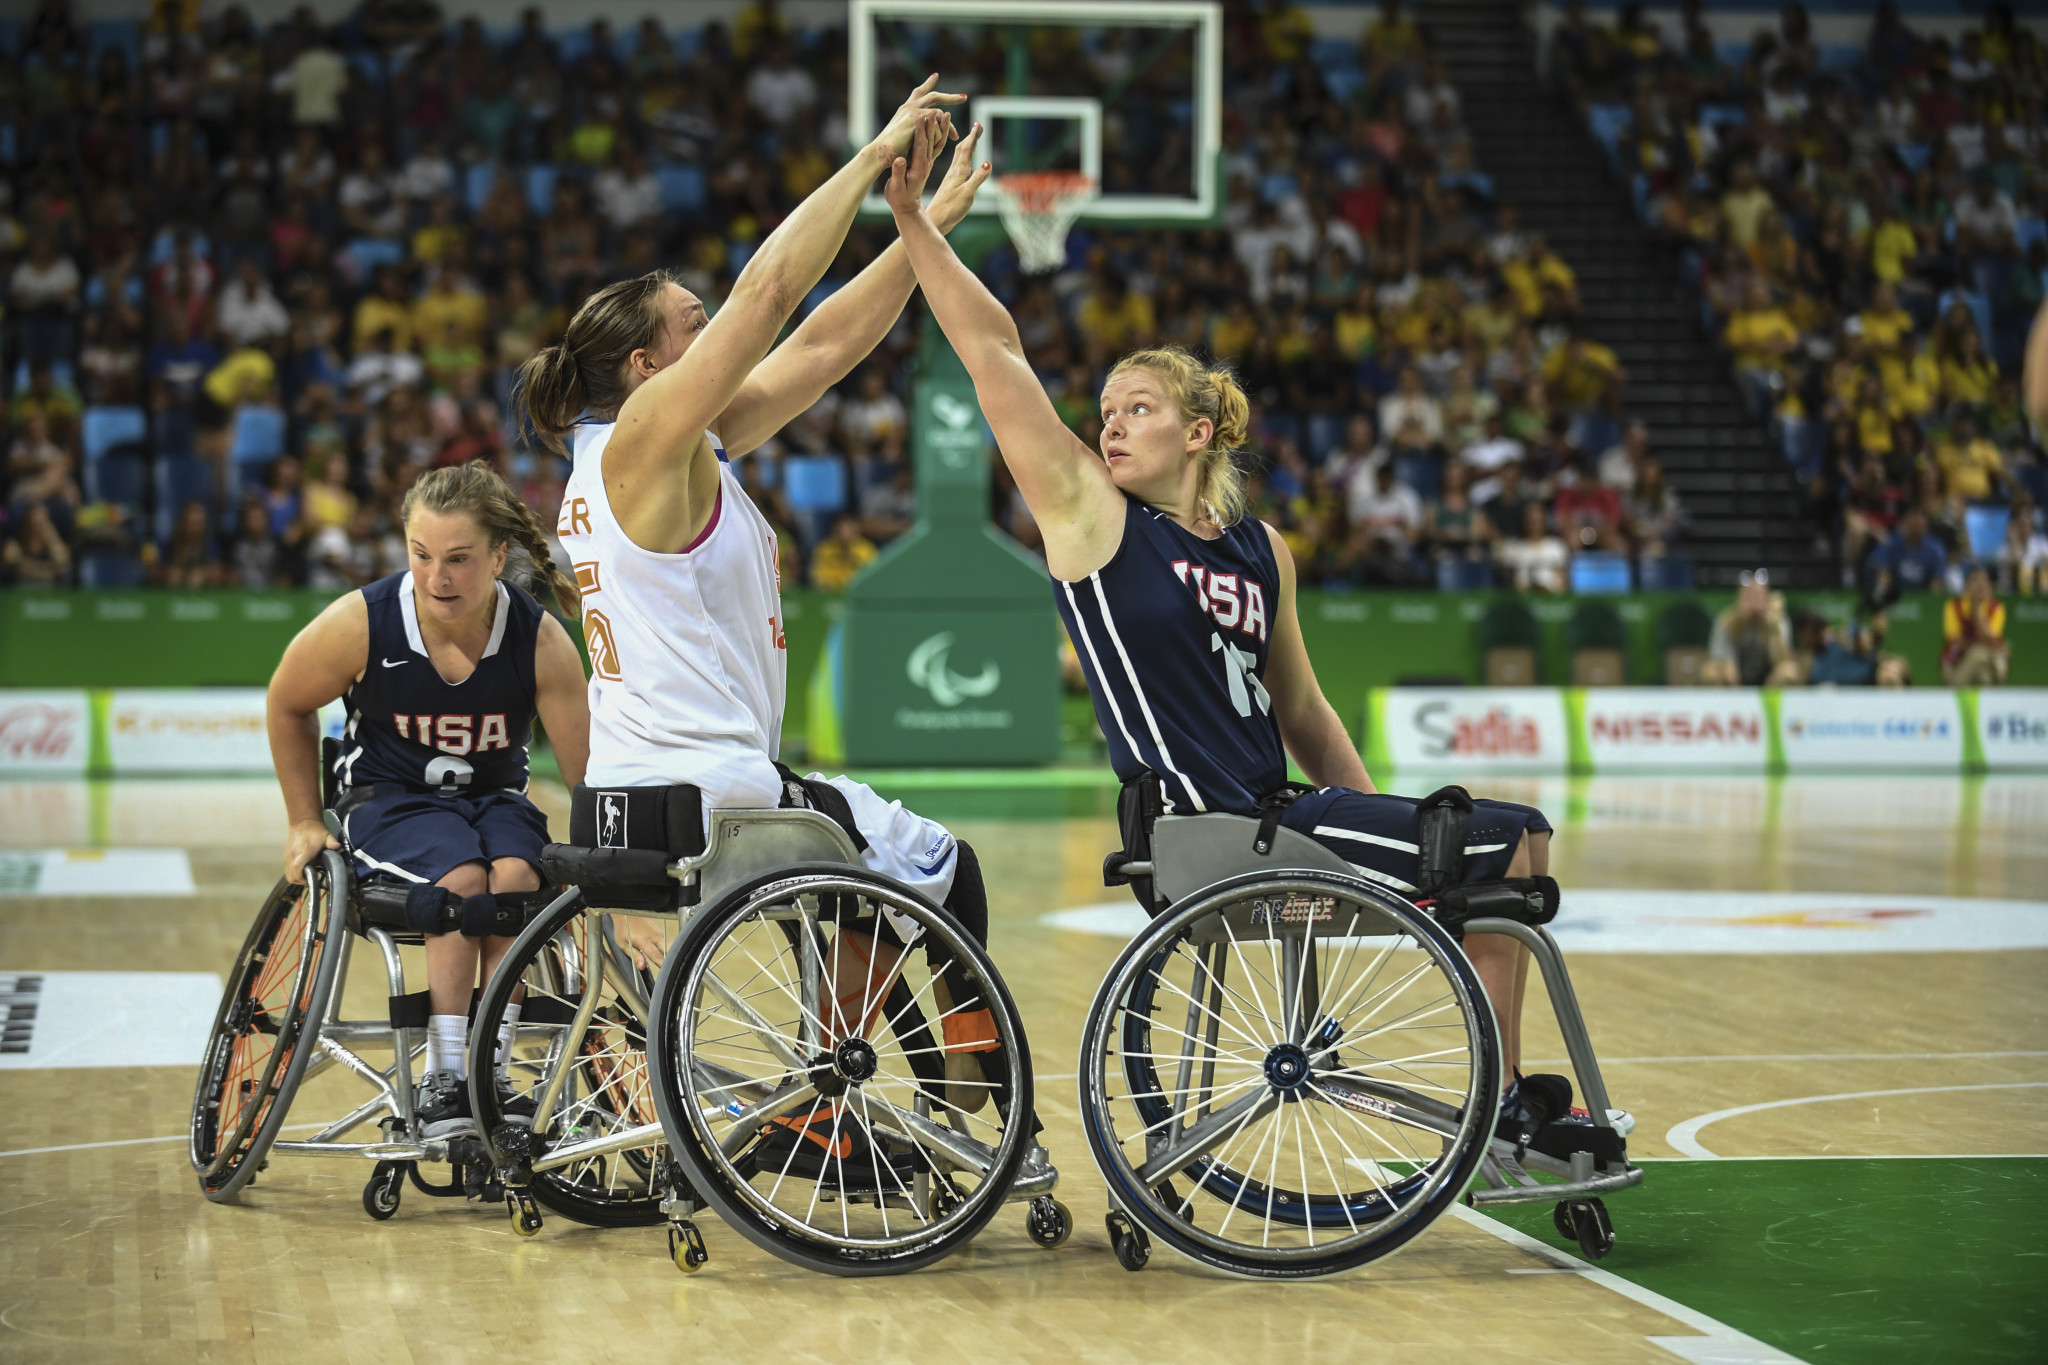 Rotterdam will host the women's competition in the 2019 IWBF European Championships next year ©Getty Images